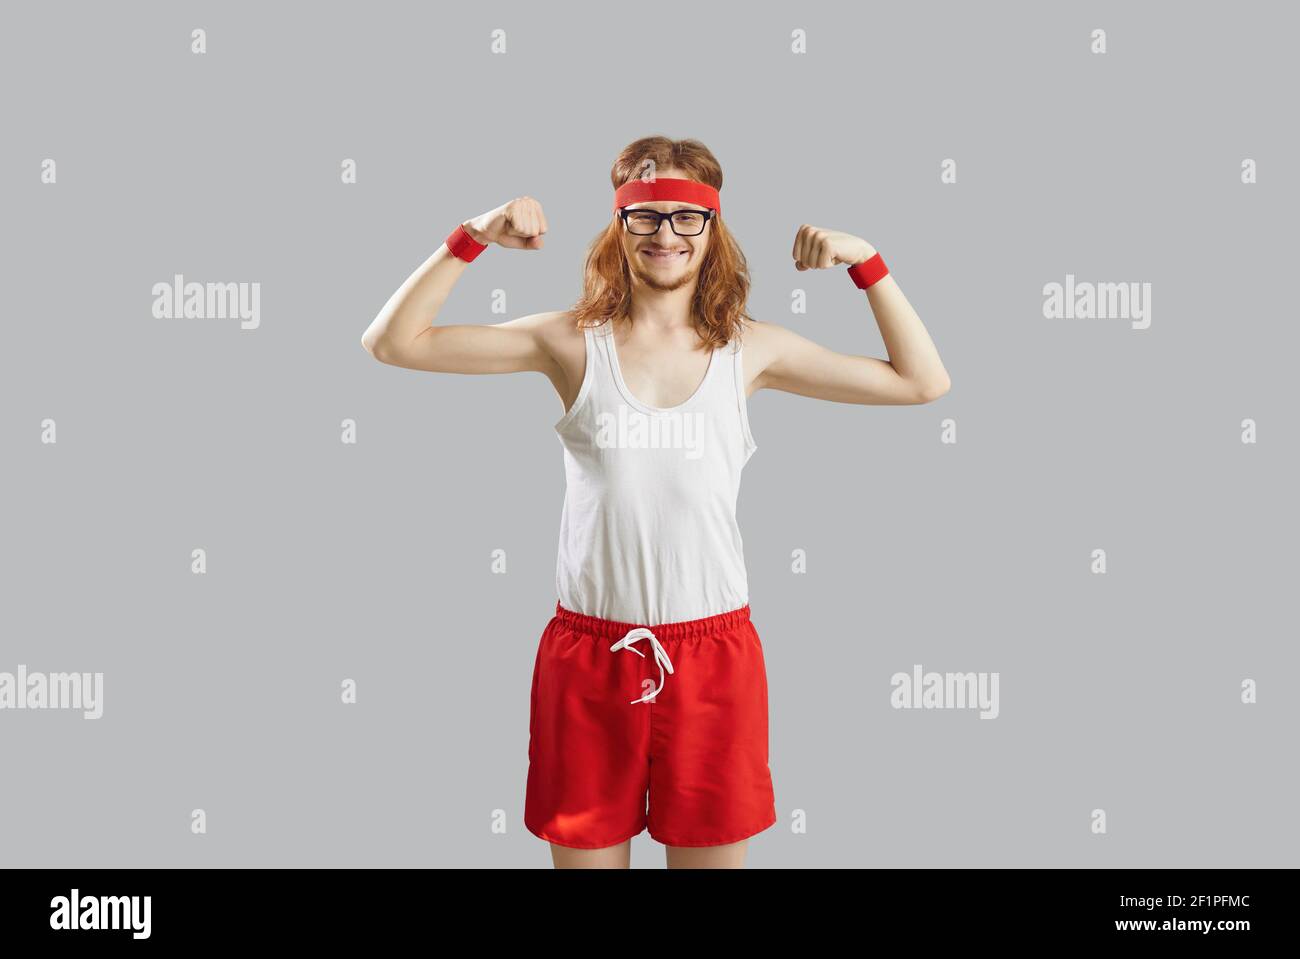 Funny skinny man in tank top and shorts showing weak muscles isolated on gray background Stock Photo